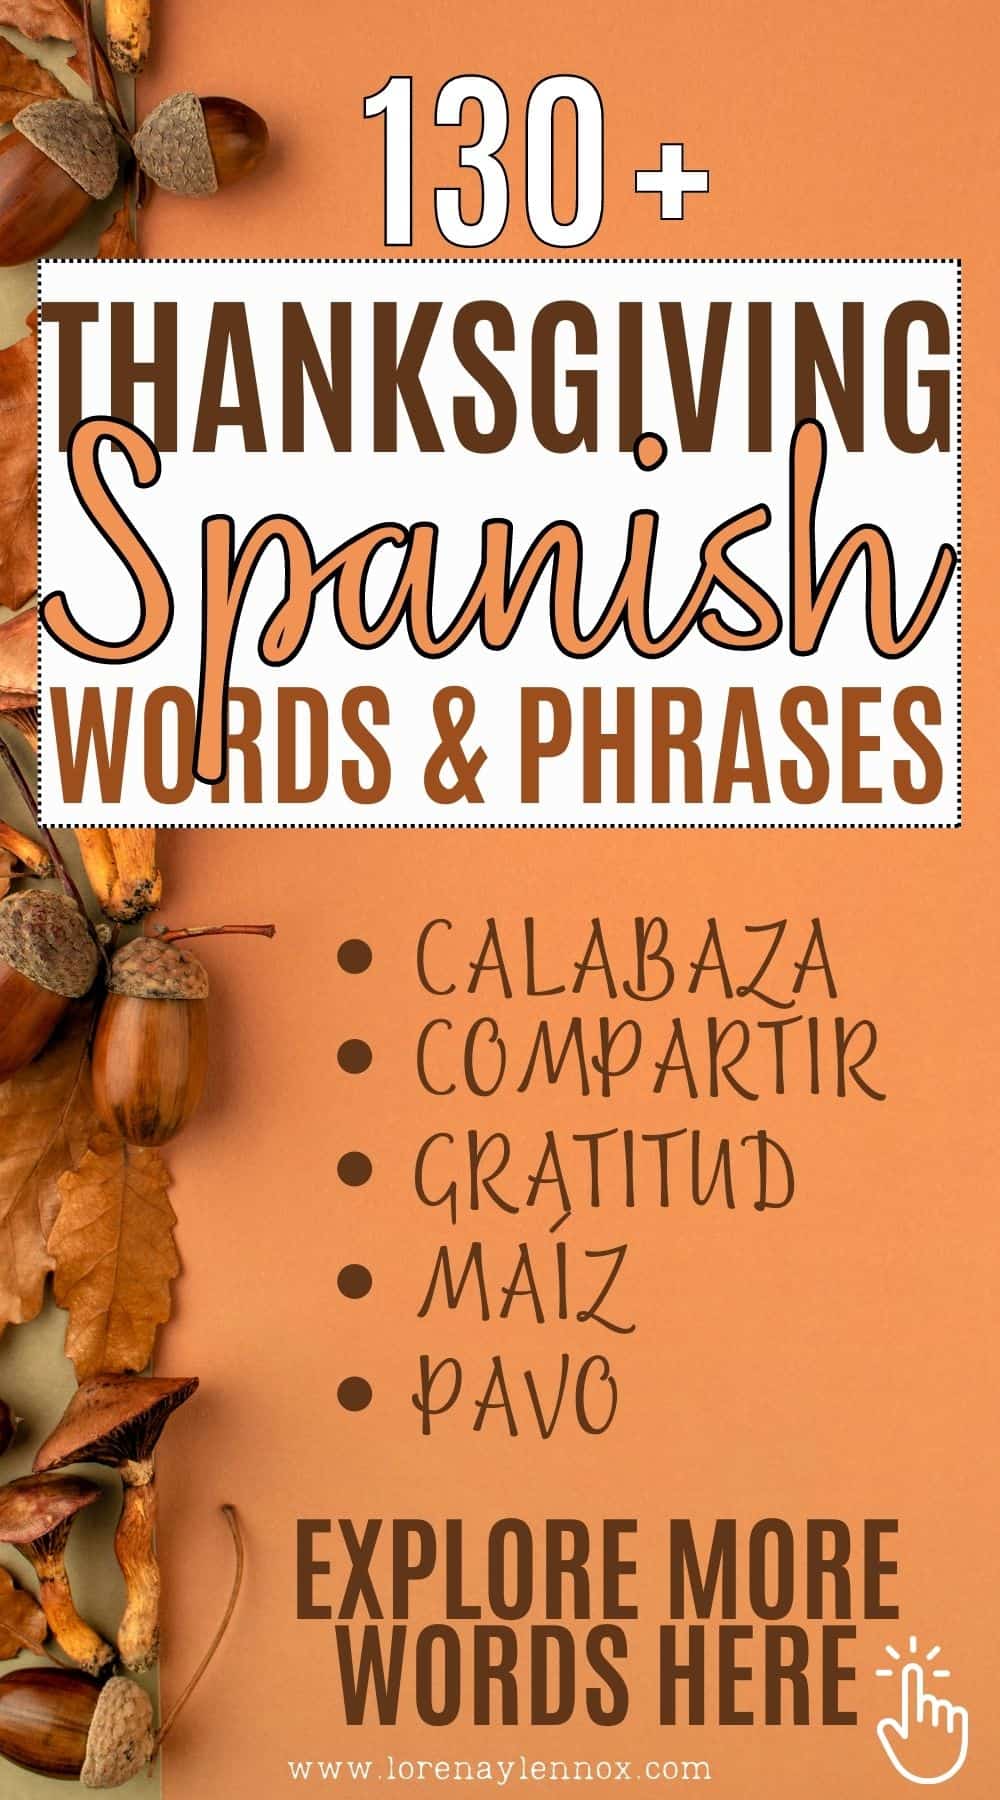 Spice up your Thanksgiving celebrations with our comprehensive list of 130+ Thanksgiving Spanish words! Whether you're a teacher looking to incorporate cultural diversity into your lesson plans or a family looking to add some new traditions to your holiday festivities, this list has something for everyone. From "pavo" to "calabaza" and "gratitud" to "familia", these words will help you explore the language and traditions of Spanish-speaking countries during the holiday season